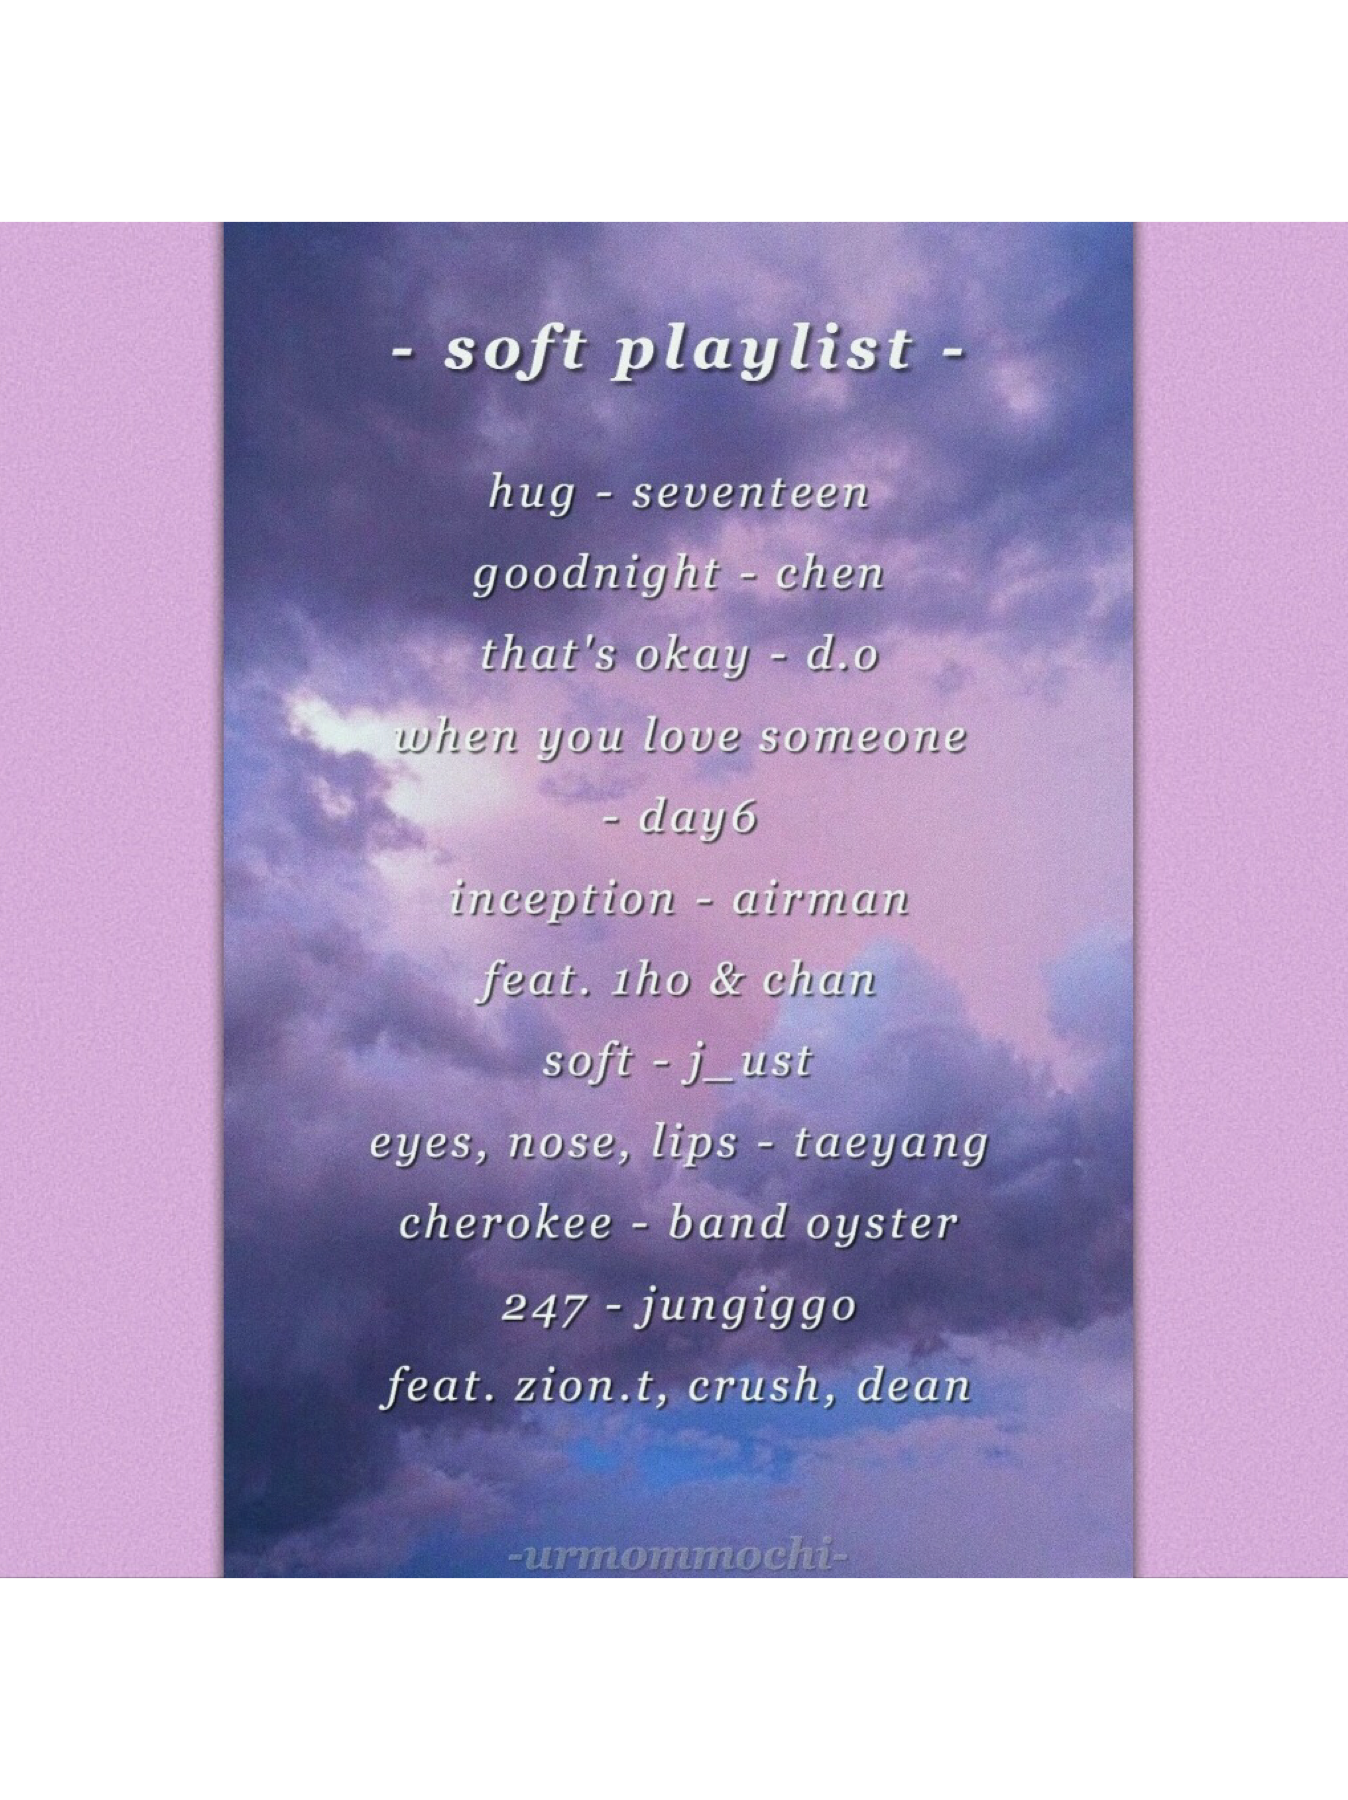 tap tap tAP~ 💎

thanks for tapping- ily, muAH.
here's my kpop playlist- except it's a soft one..
ùwú

should i put up playlists regularly?
also i changed my username lol

- sending love -